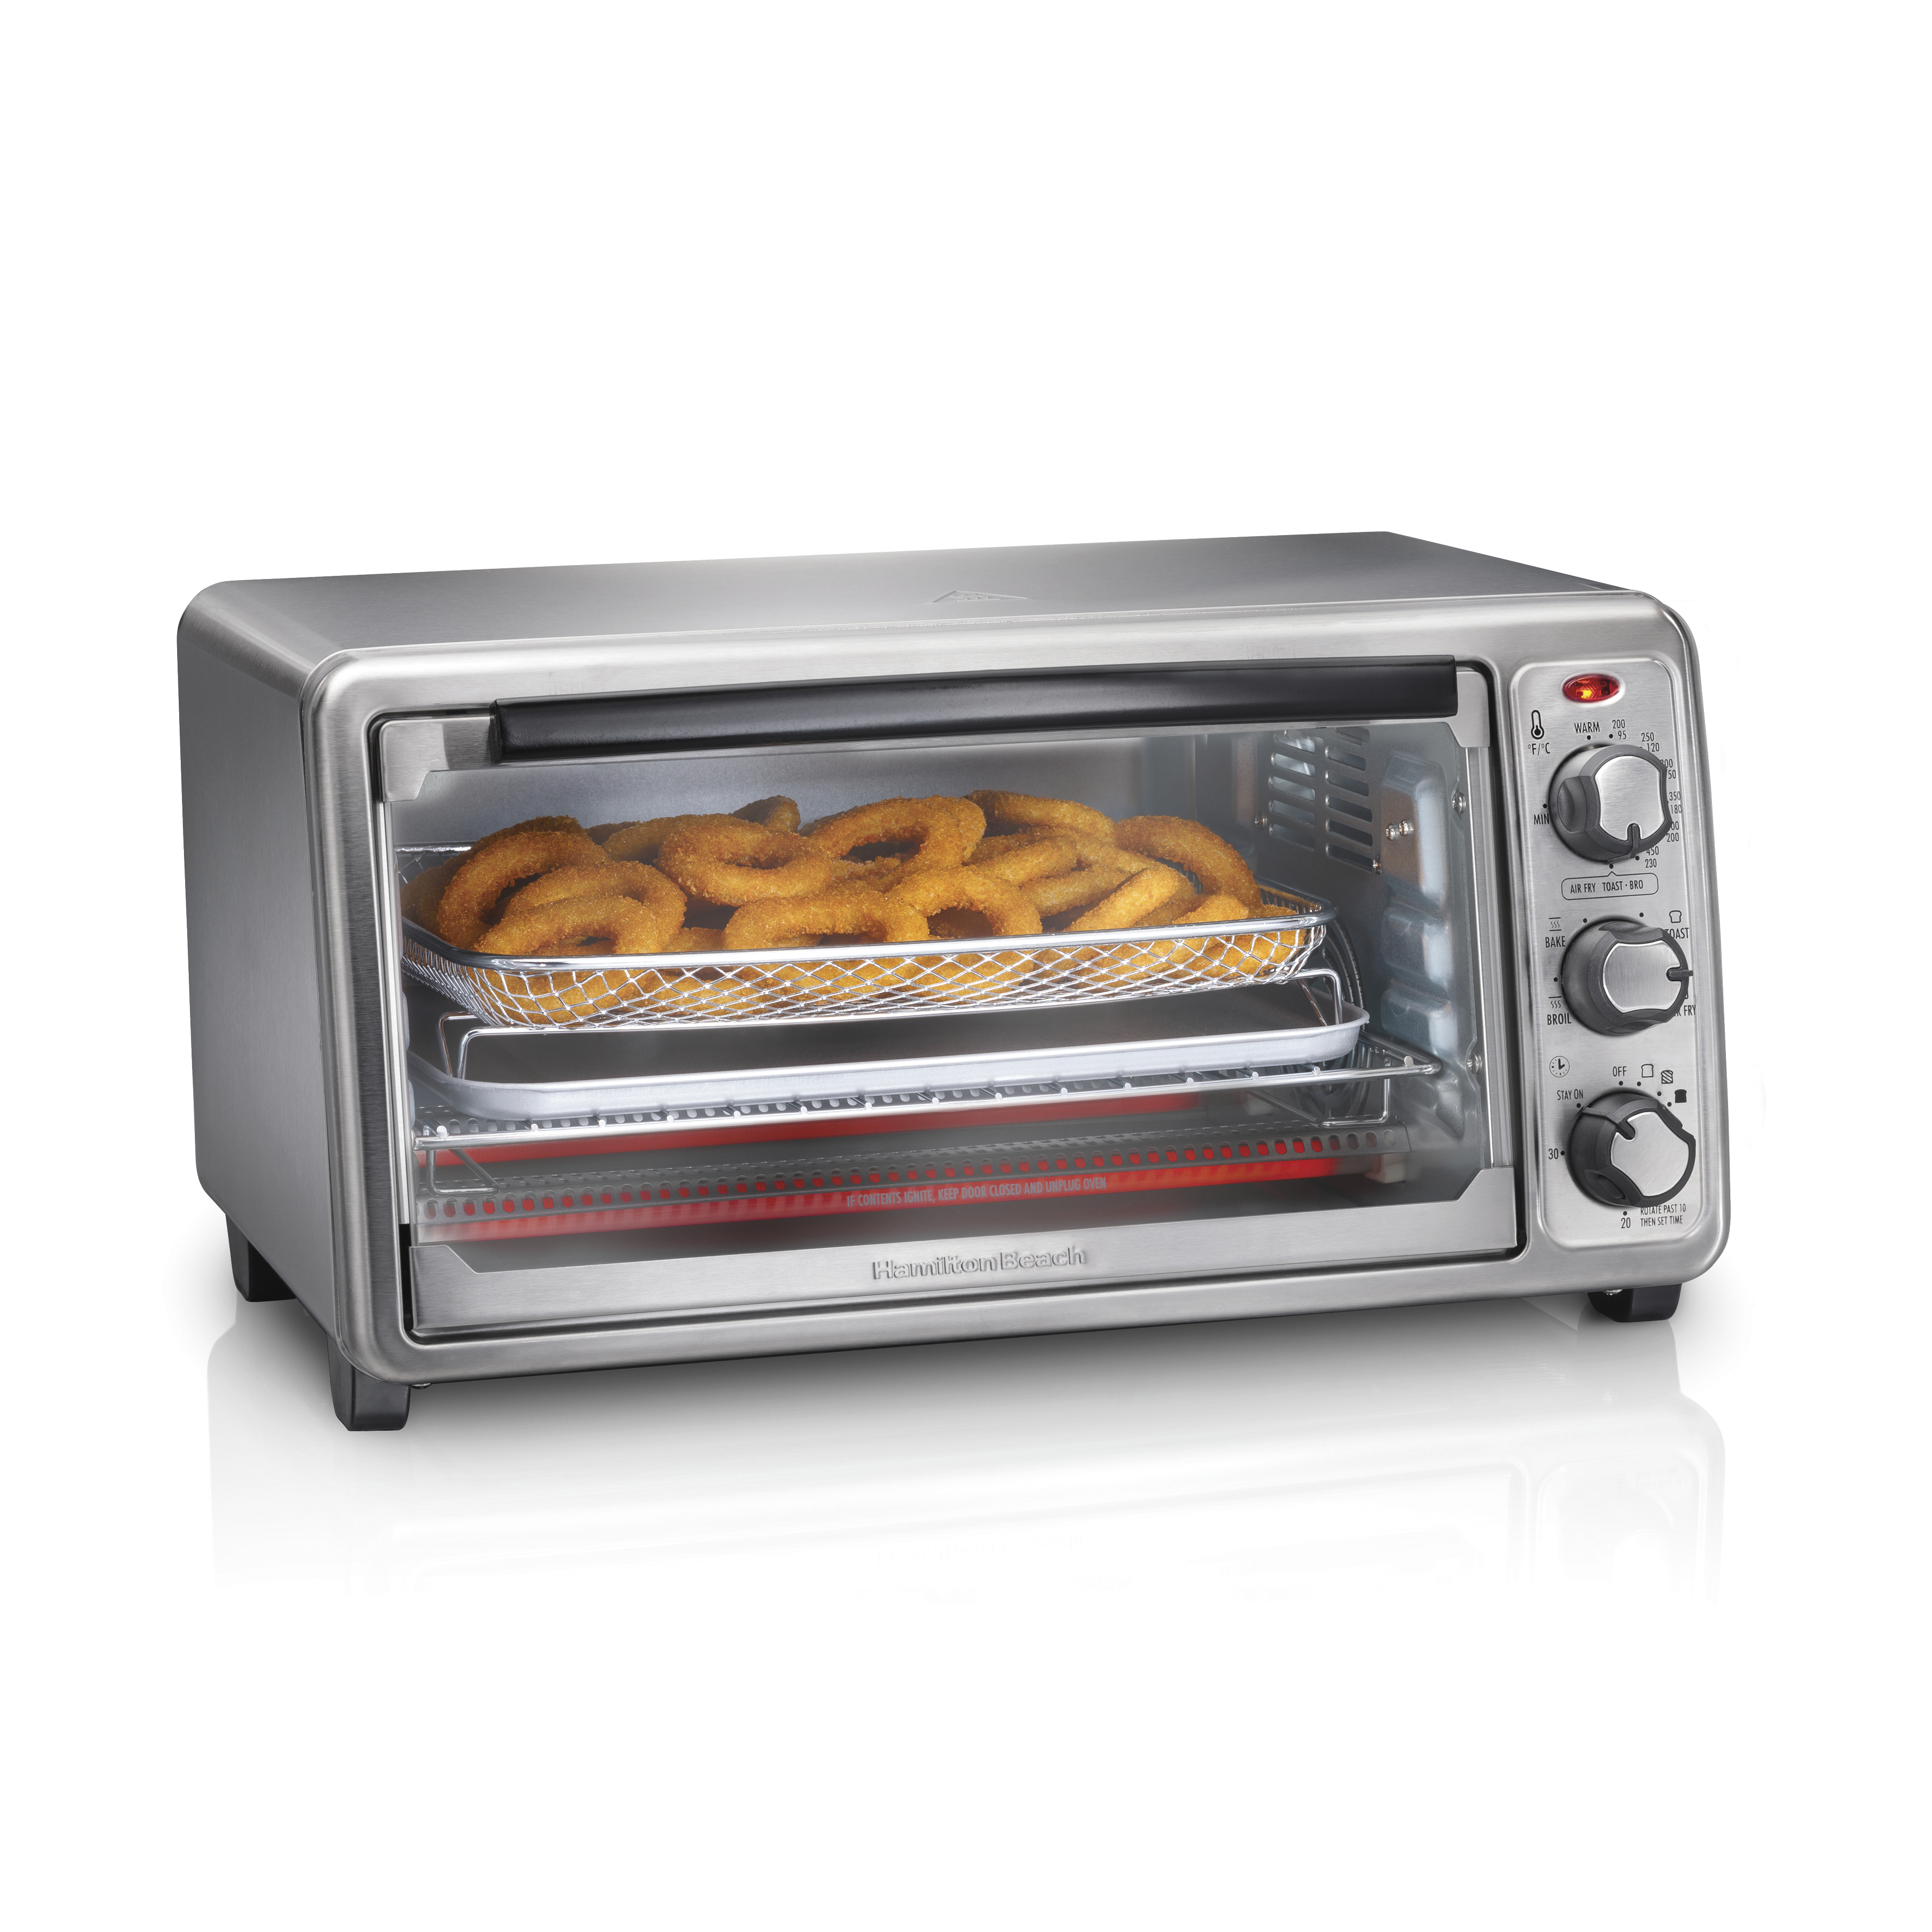 Hamilton Beach Sure-Crisp Air Fryer Toaster Oven, 6 Slice Capacity, Stainless Steel Exterior, 31413 - image 1 of 3